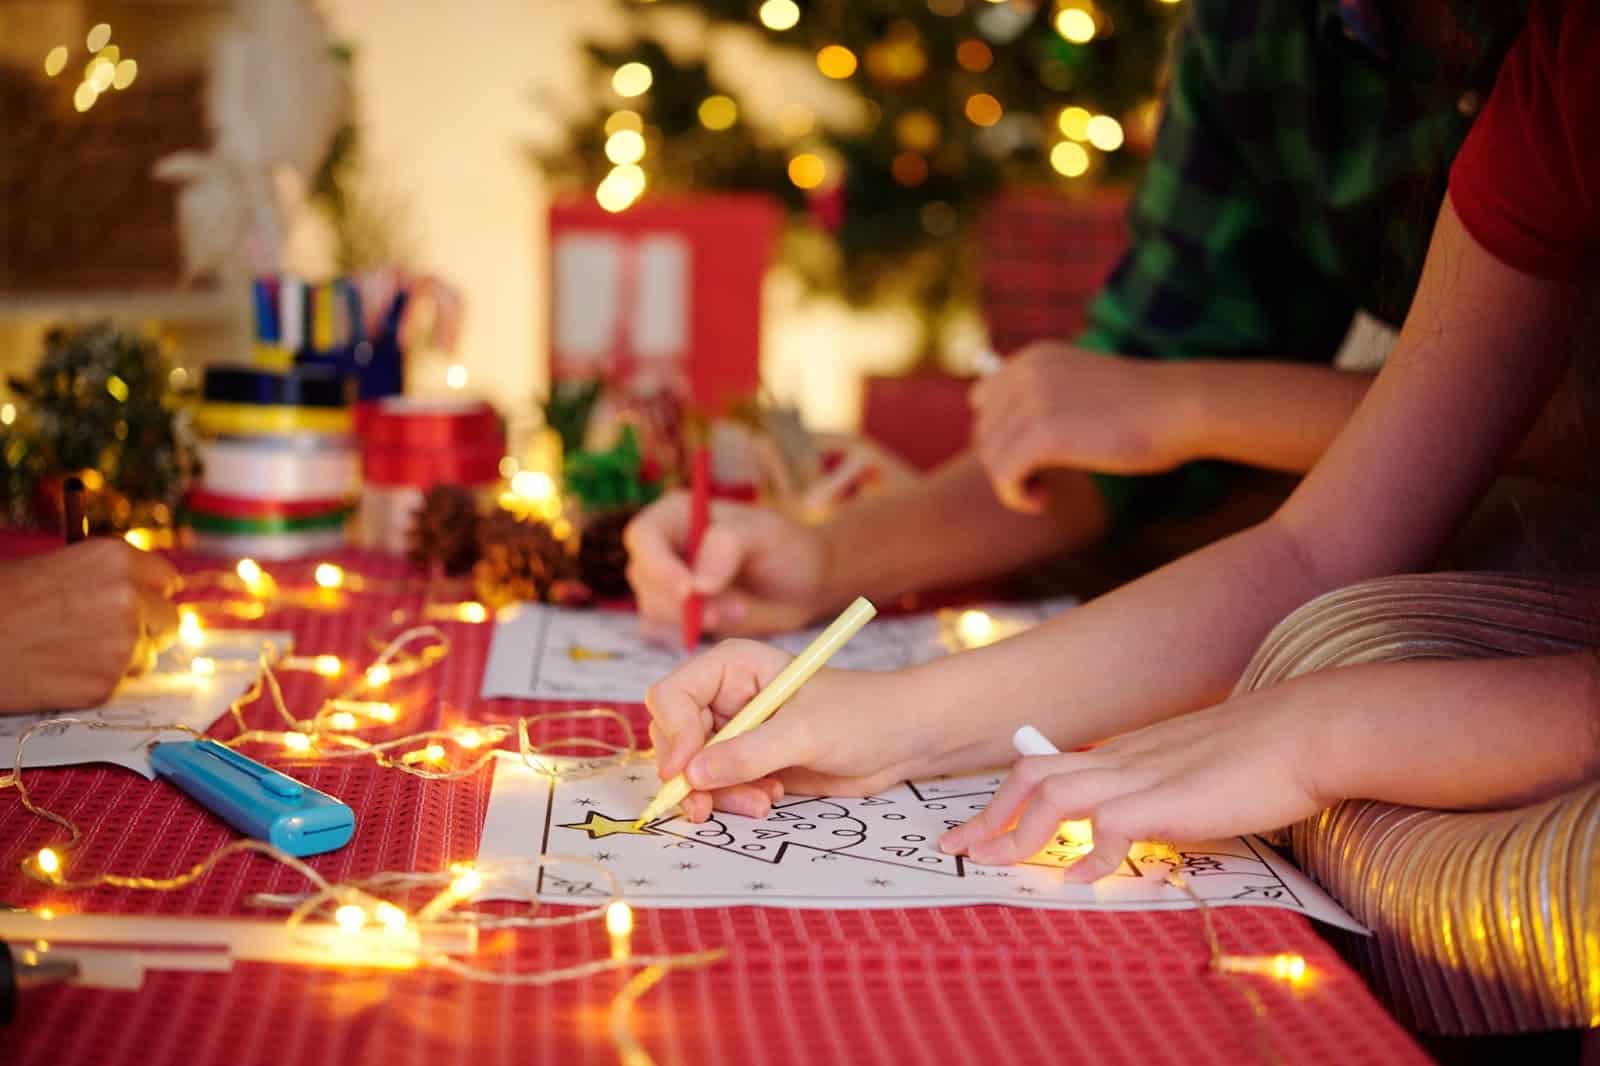 coloring during the holidays is a good way to reduce stress for kids